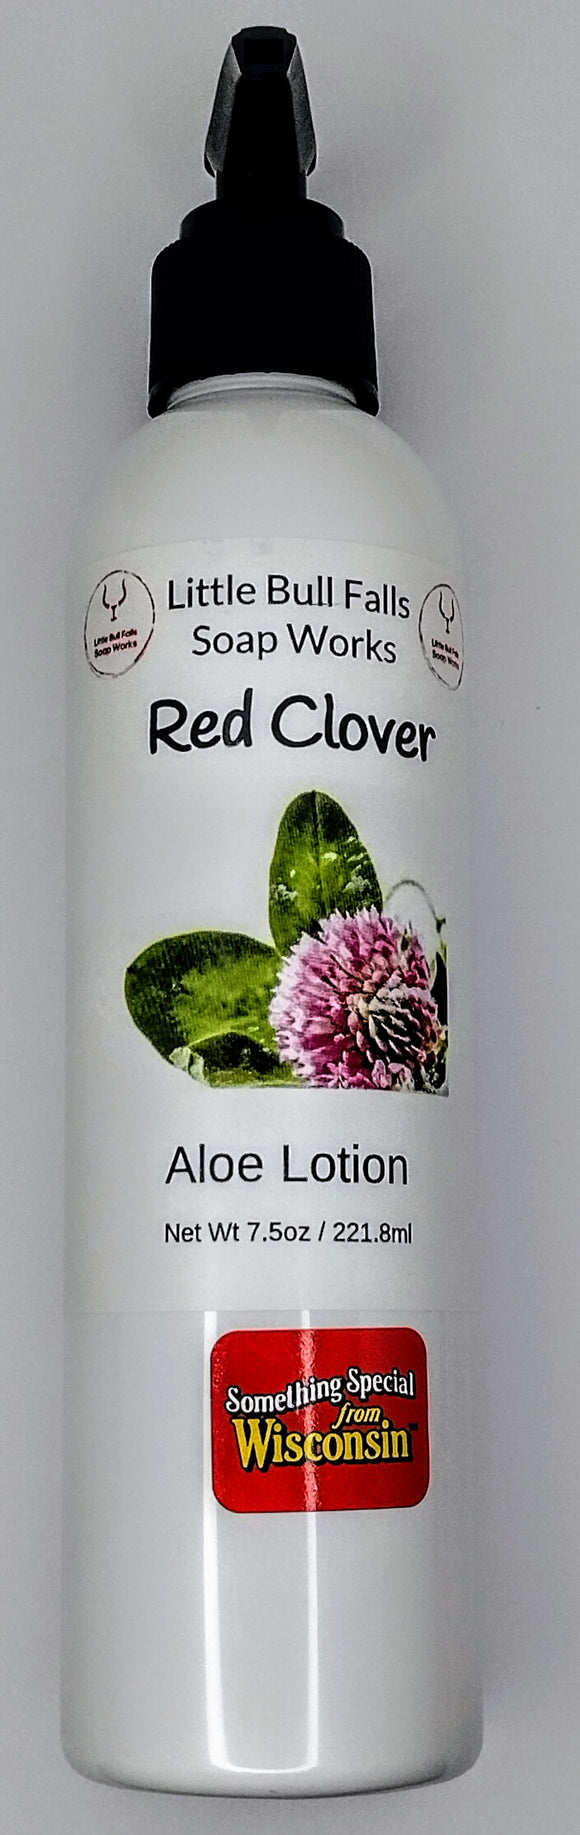 Red Clover Tea. Red Clover handmade lotion. Gifts for gardeners.